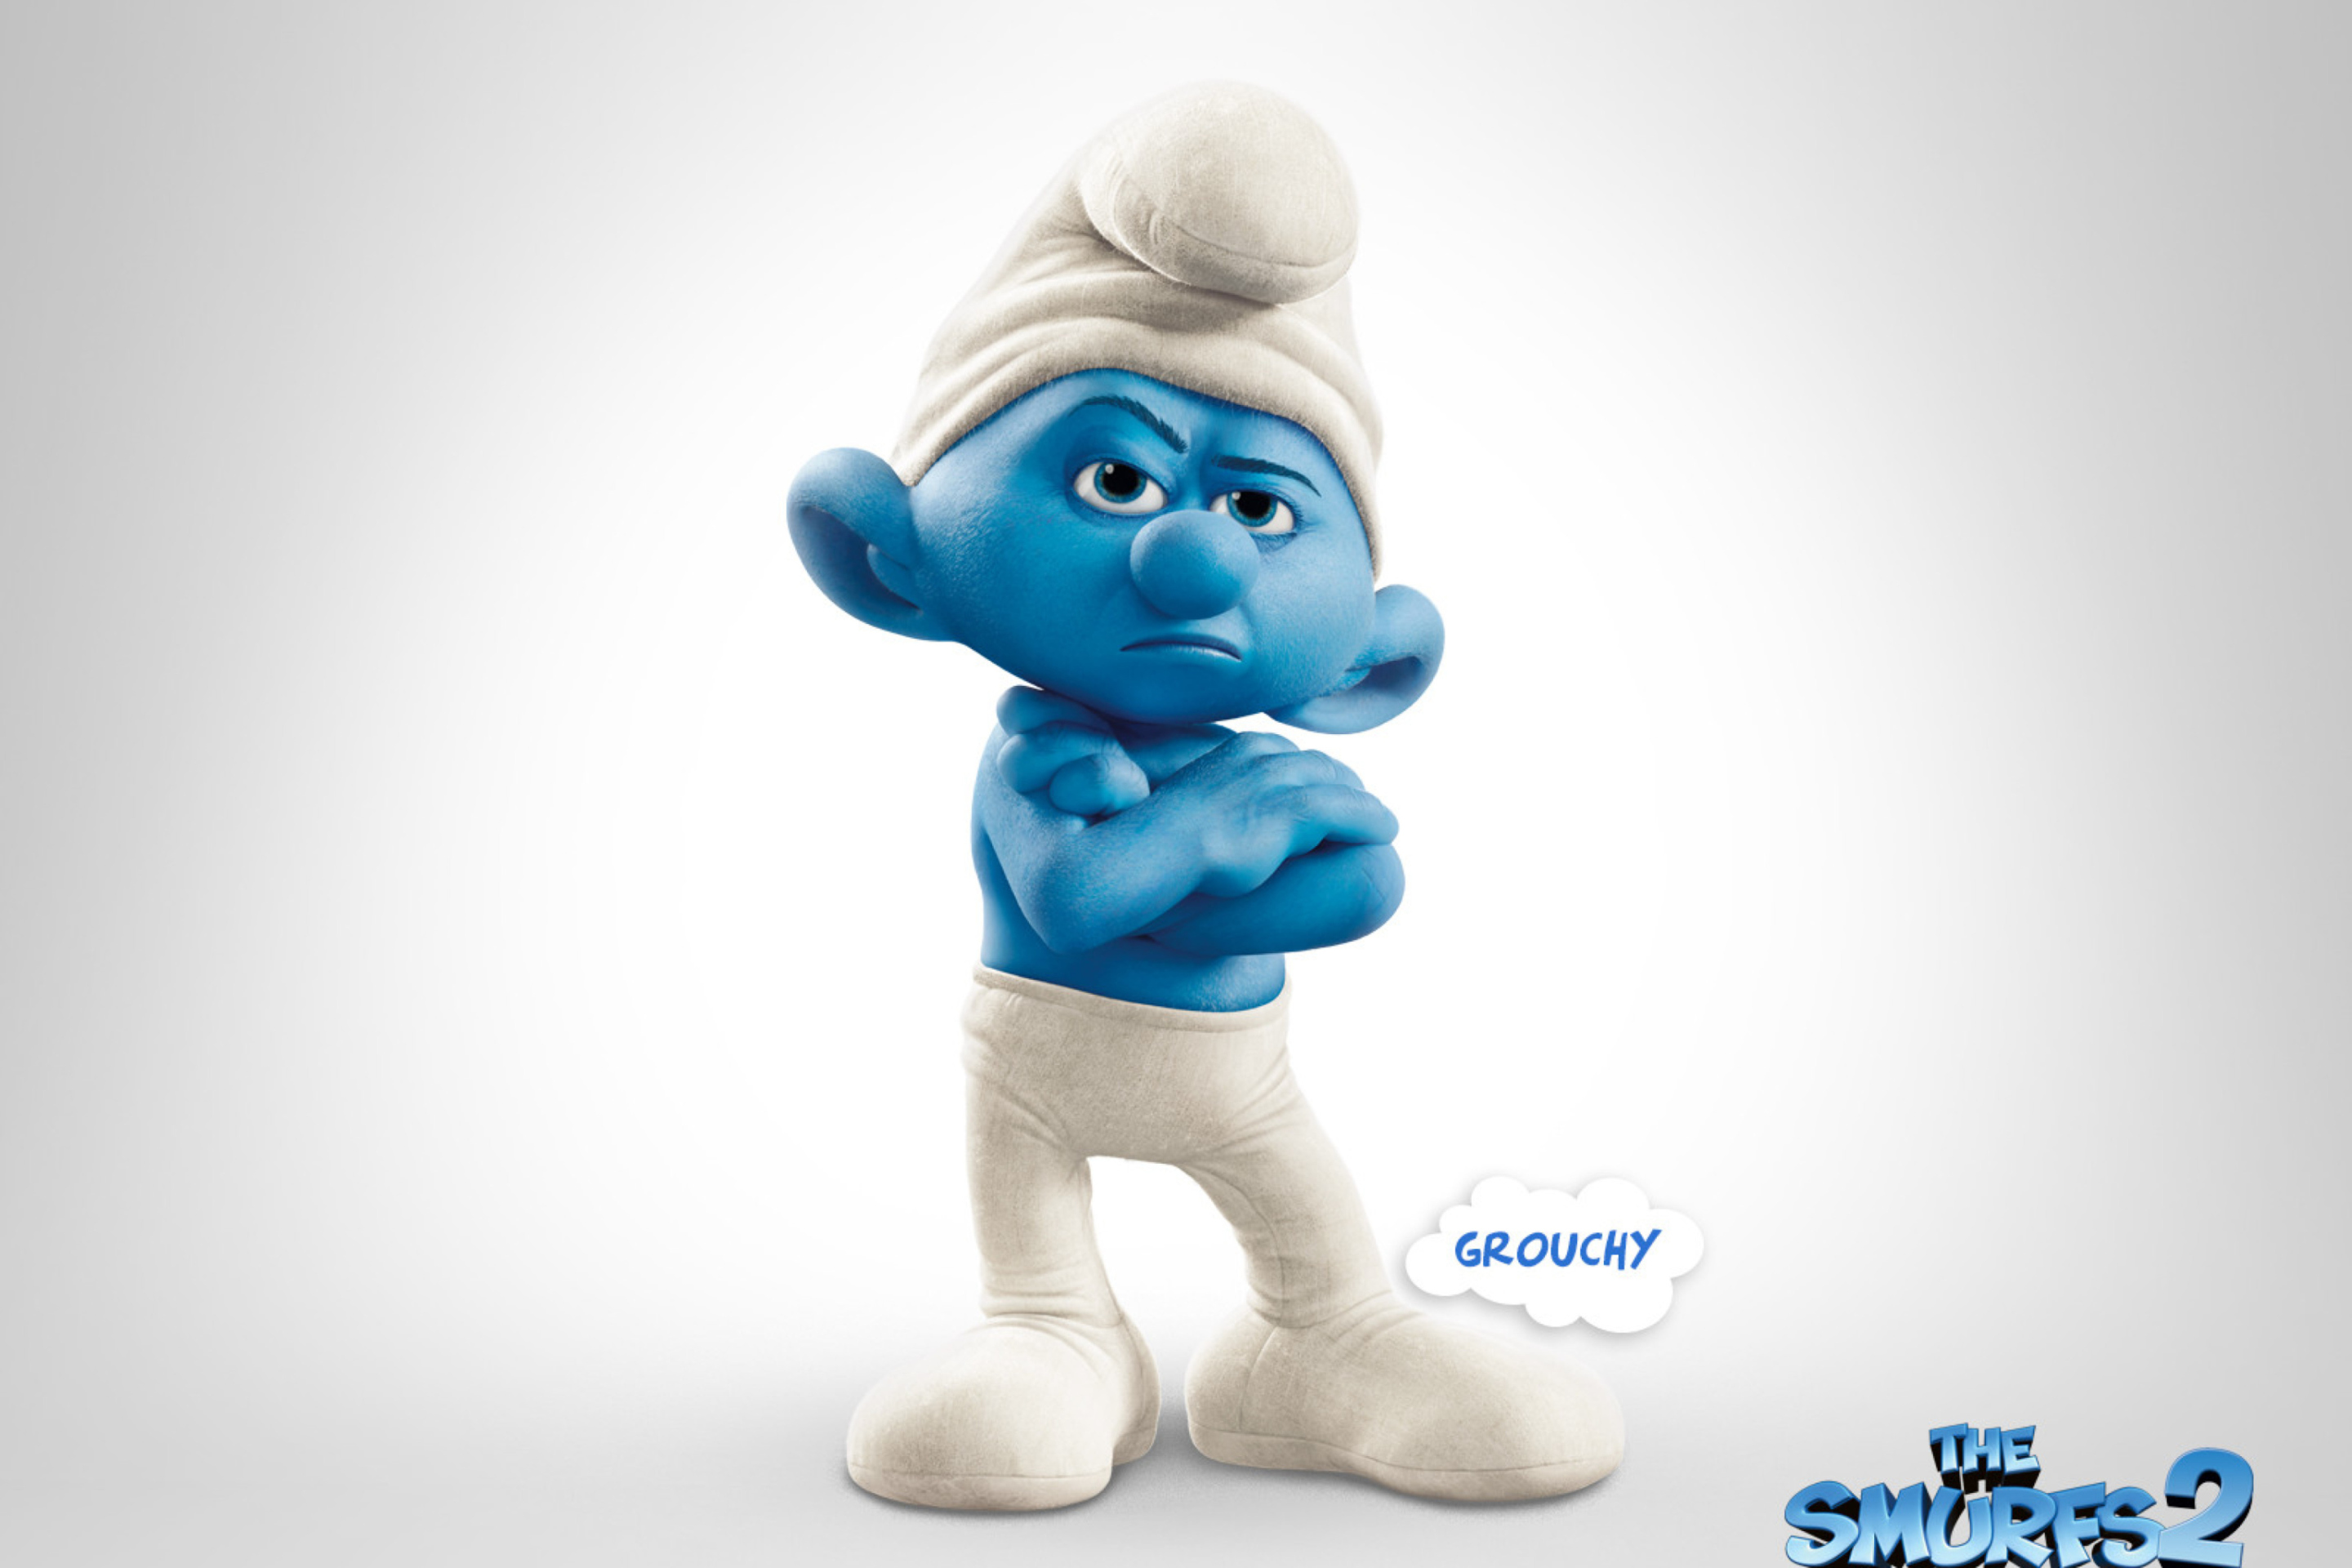 Grouchy The Smurfs 2 wallpaper 2880x1920